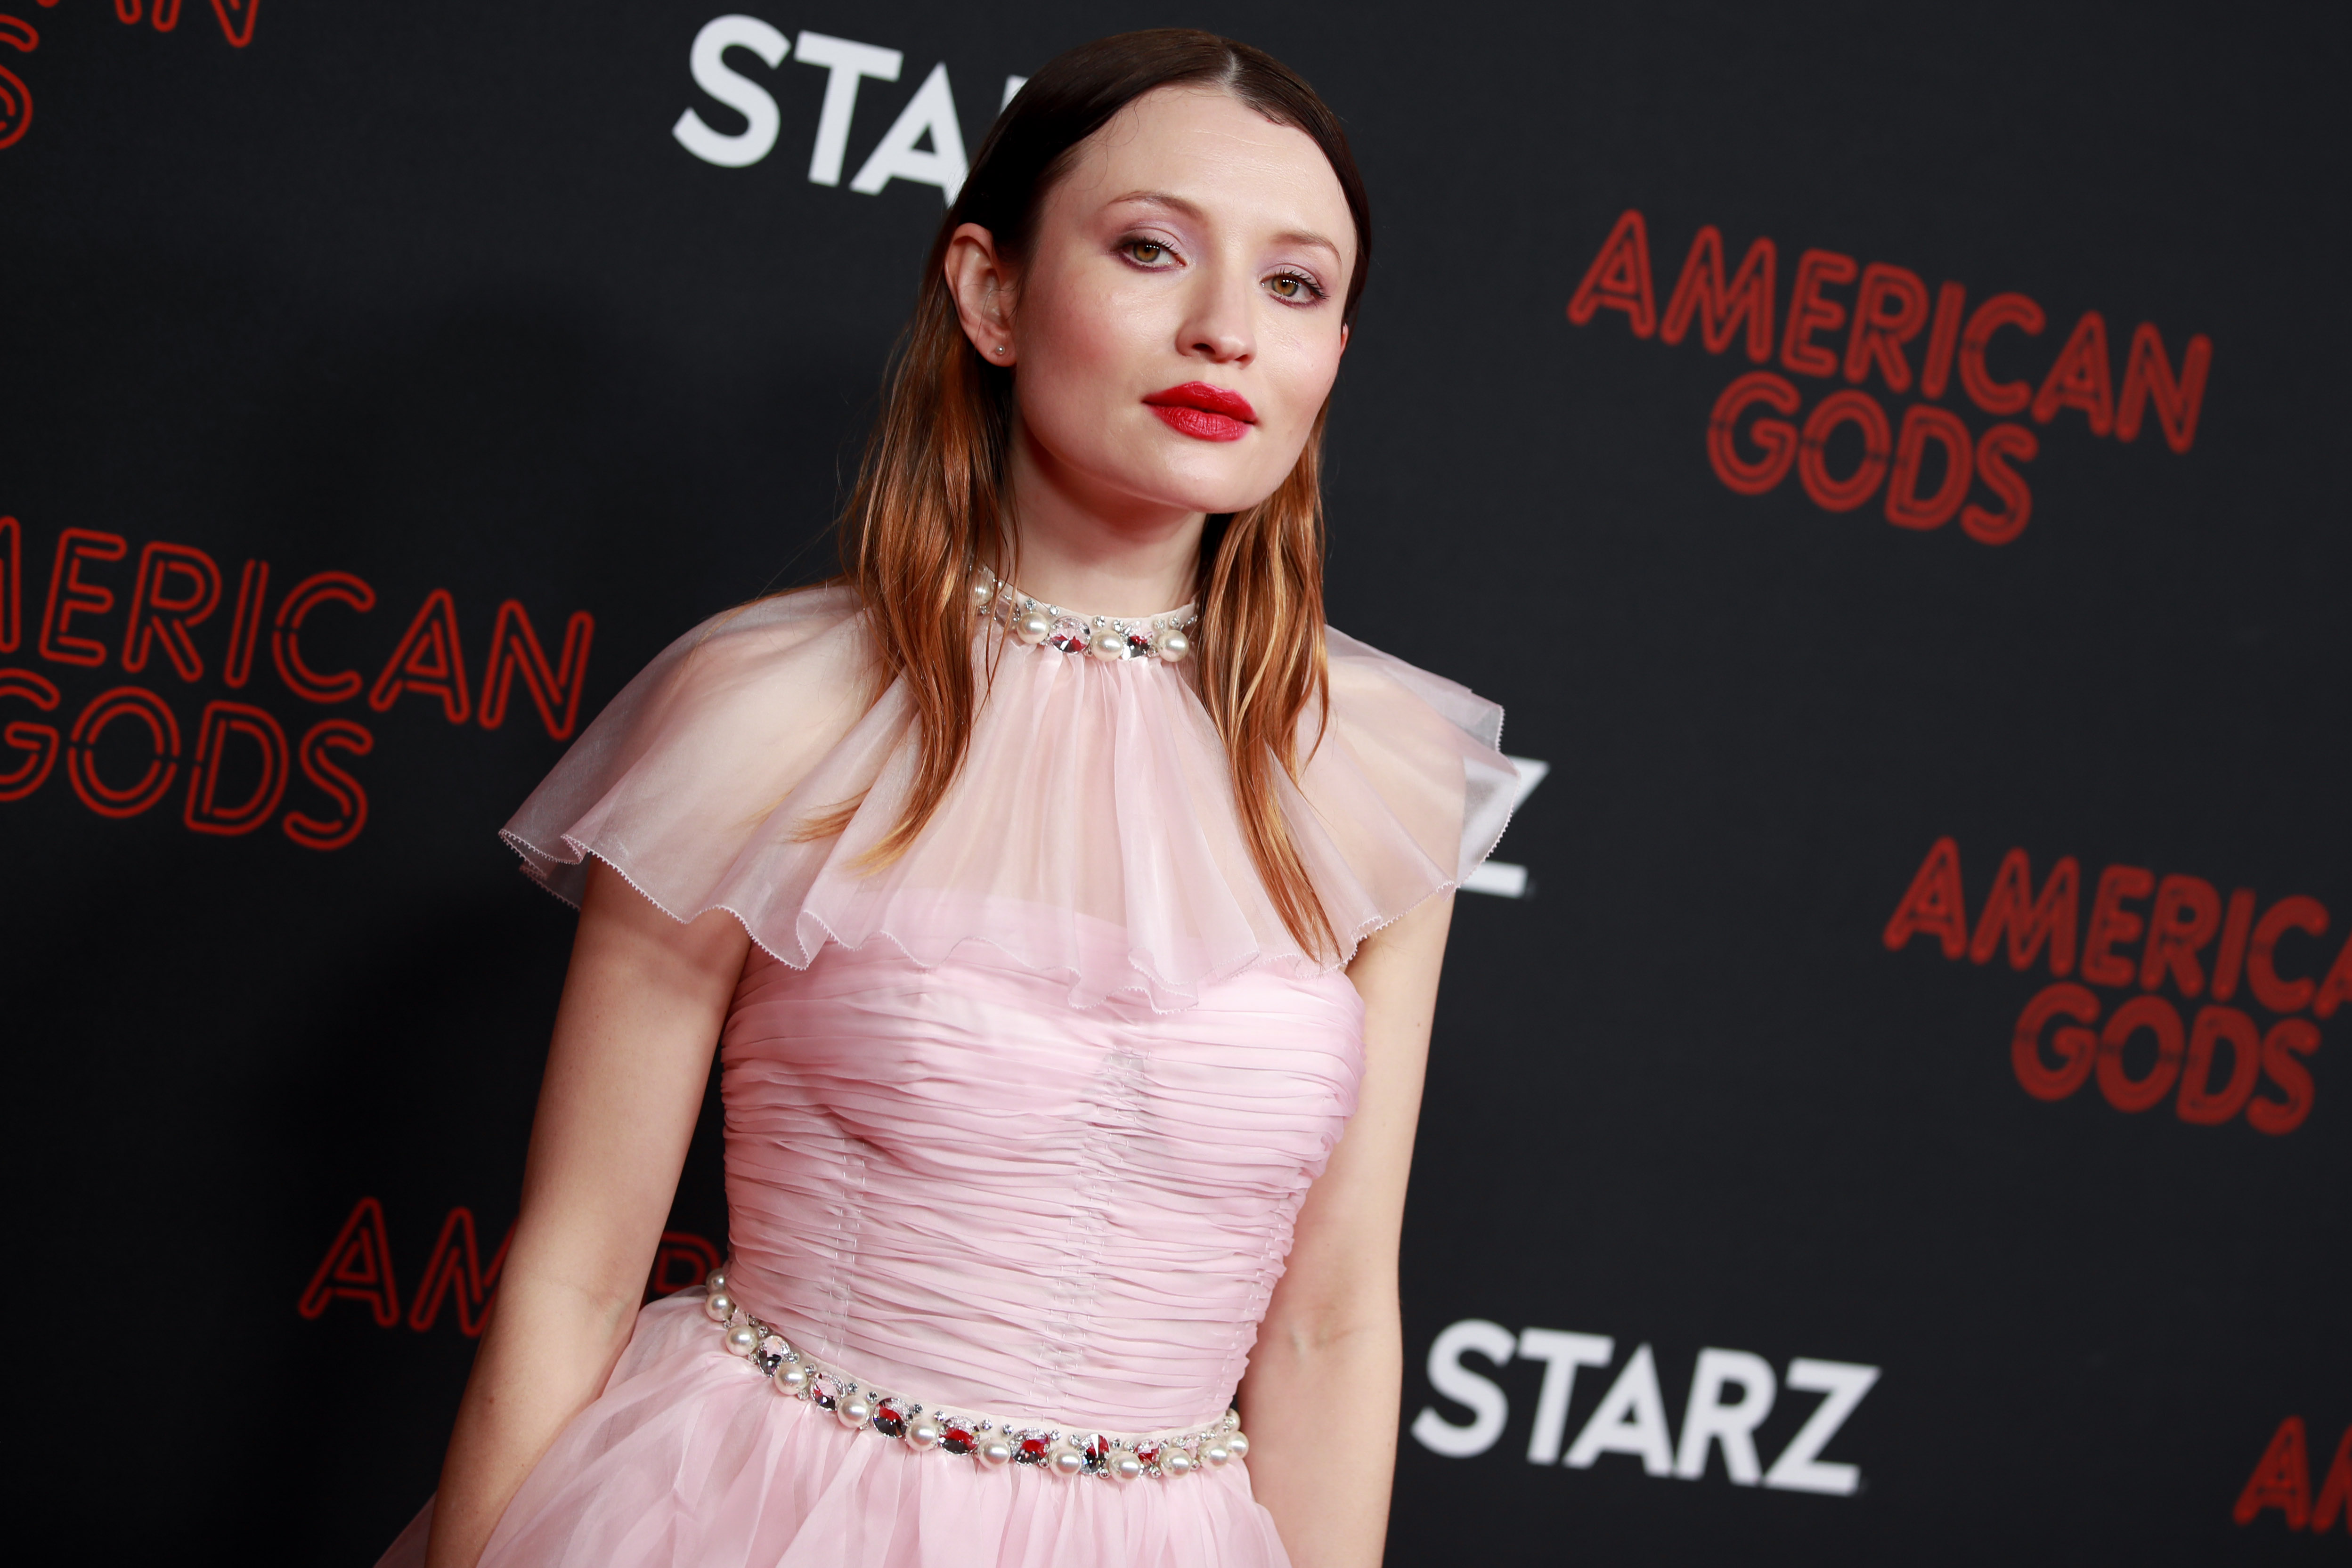 Emily Browning attends the premiere of STARZ's "American Gods" season 2 at Ace Hotel on March 05, 2019, in Los Angeles, California. | Source: Getty Images